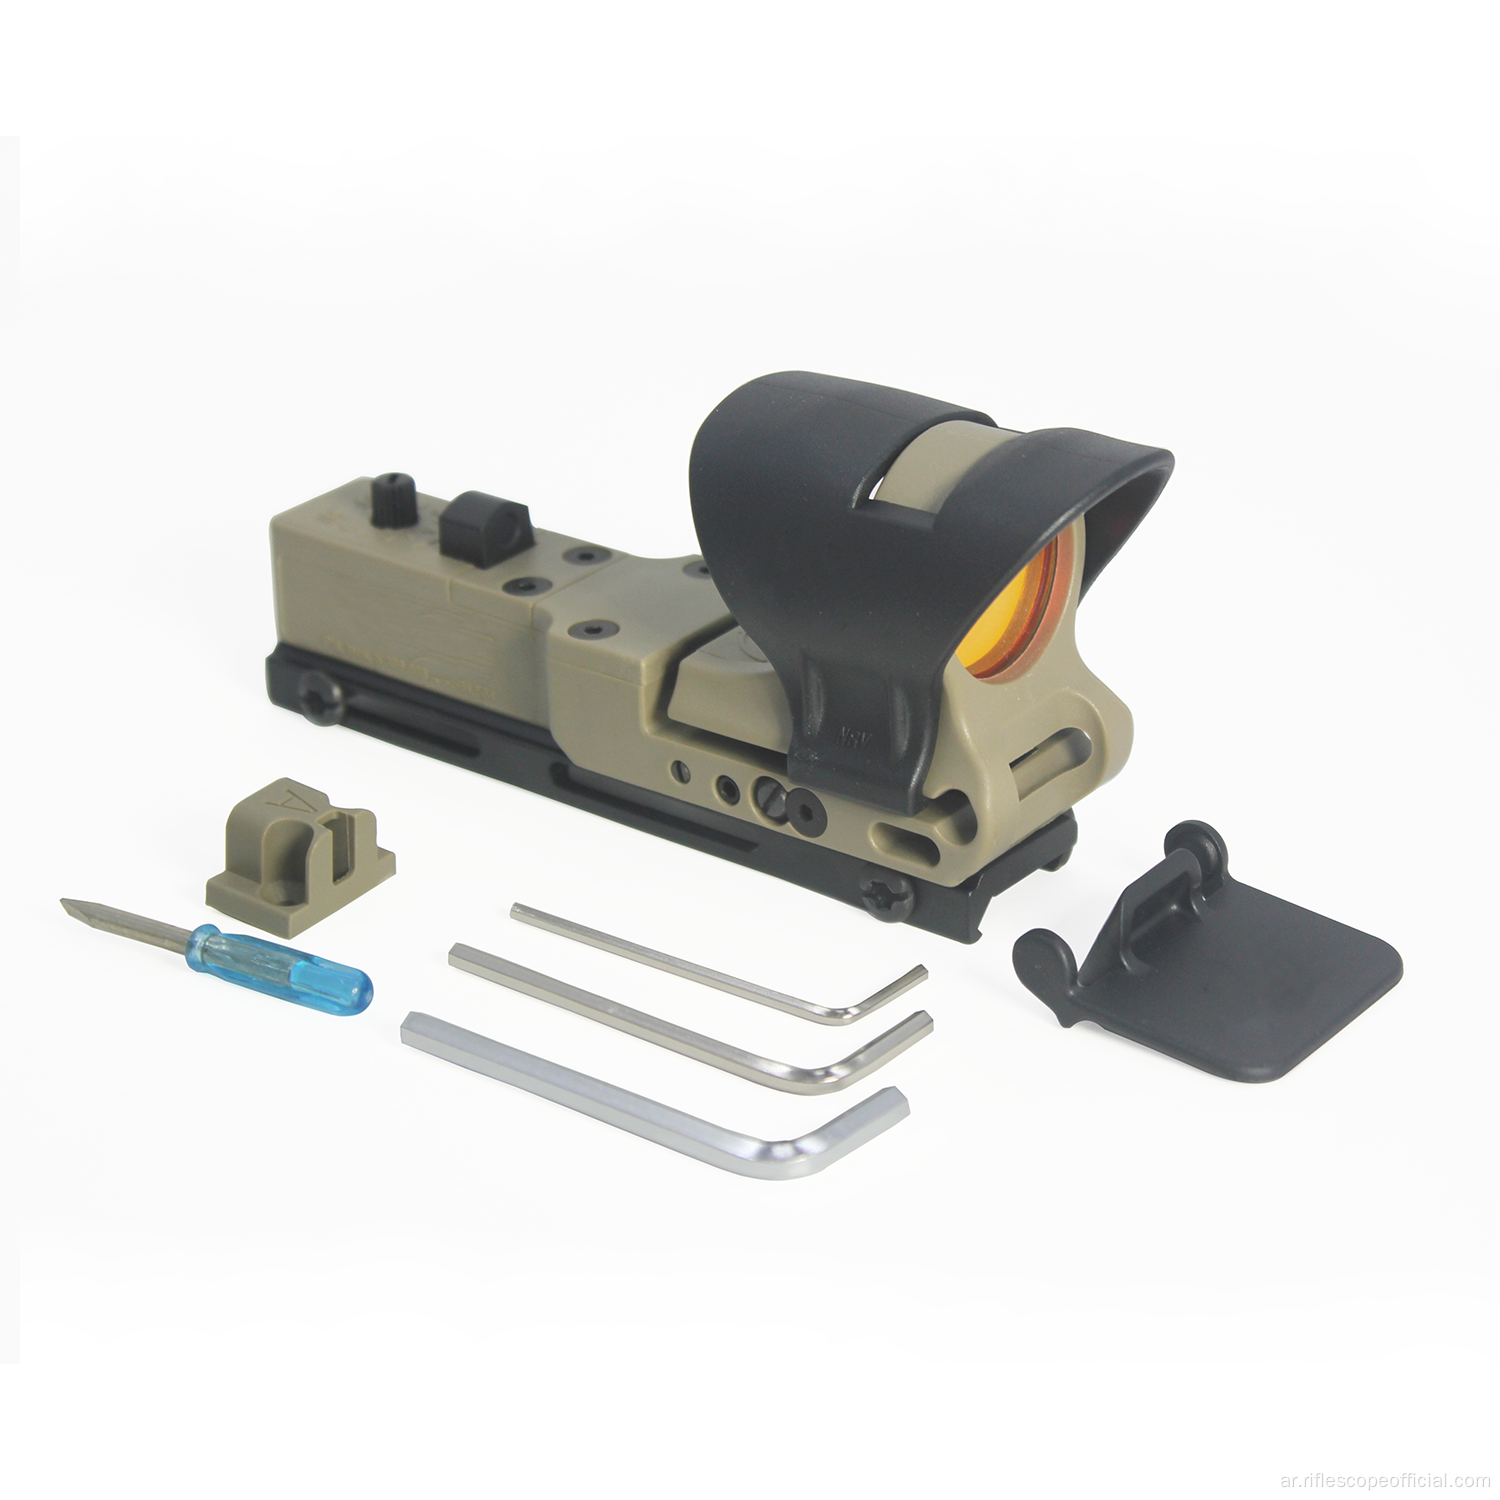 C-More Systems Sailway Red Dot Sight